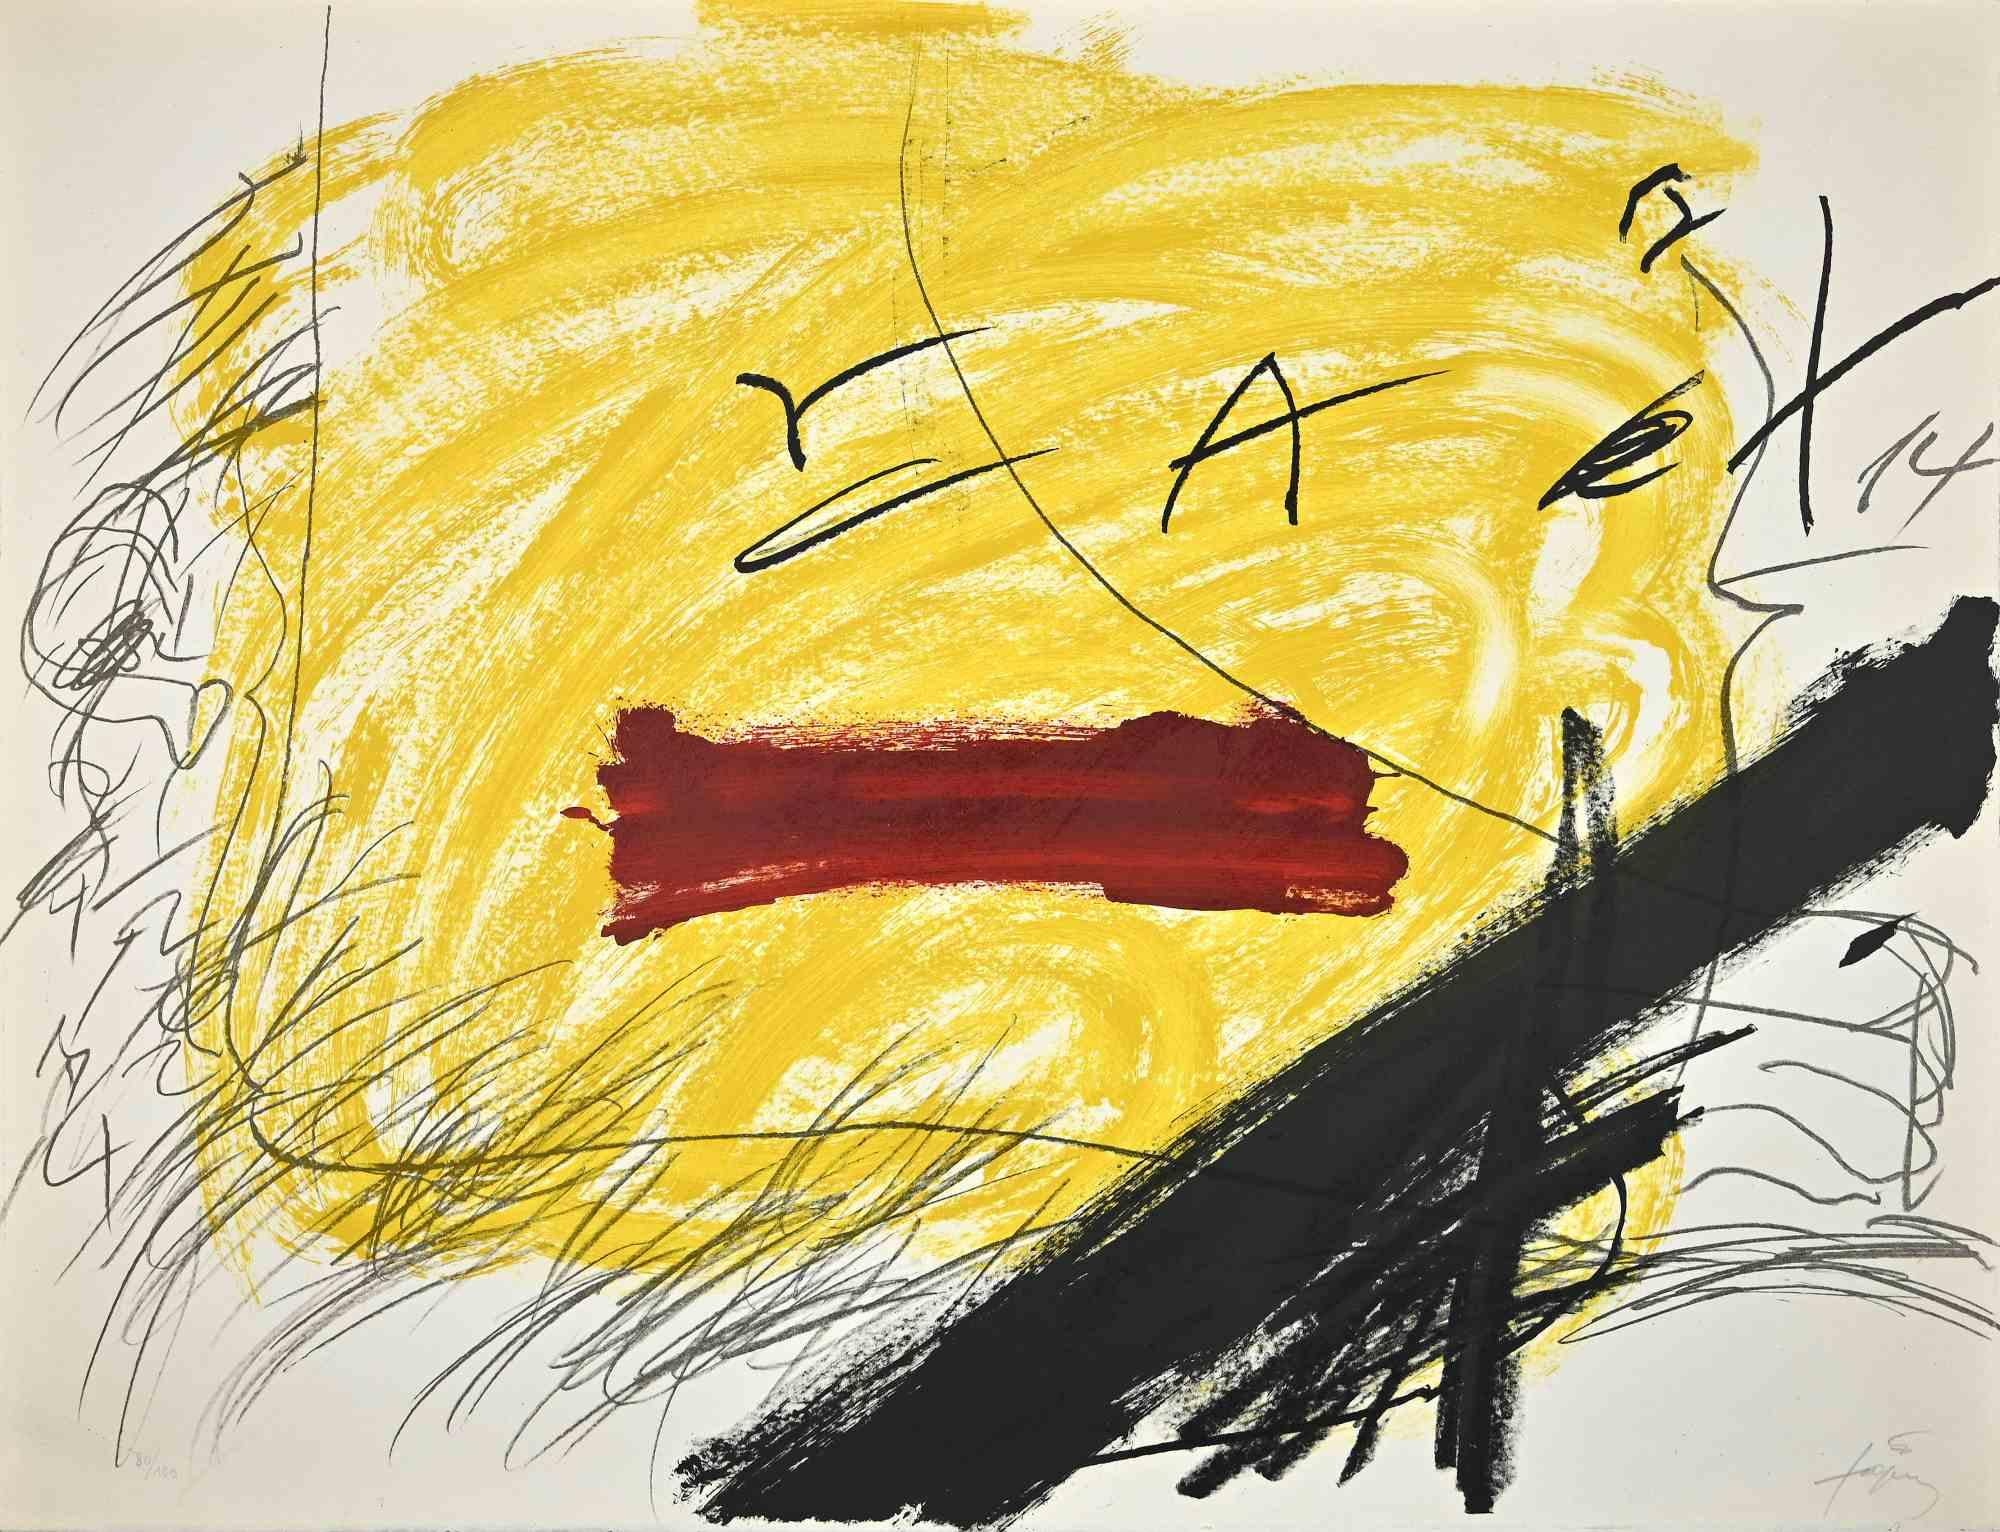 Antoni Tàpies Abstract Print - Untitled -  Lithograph by Antoni Tapies - 1973